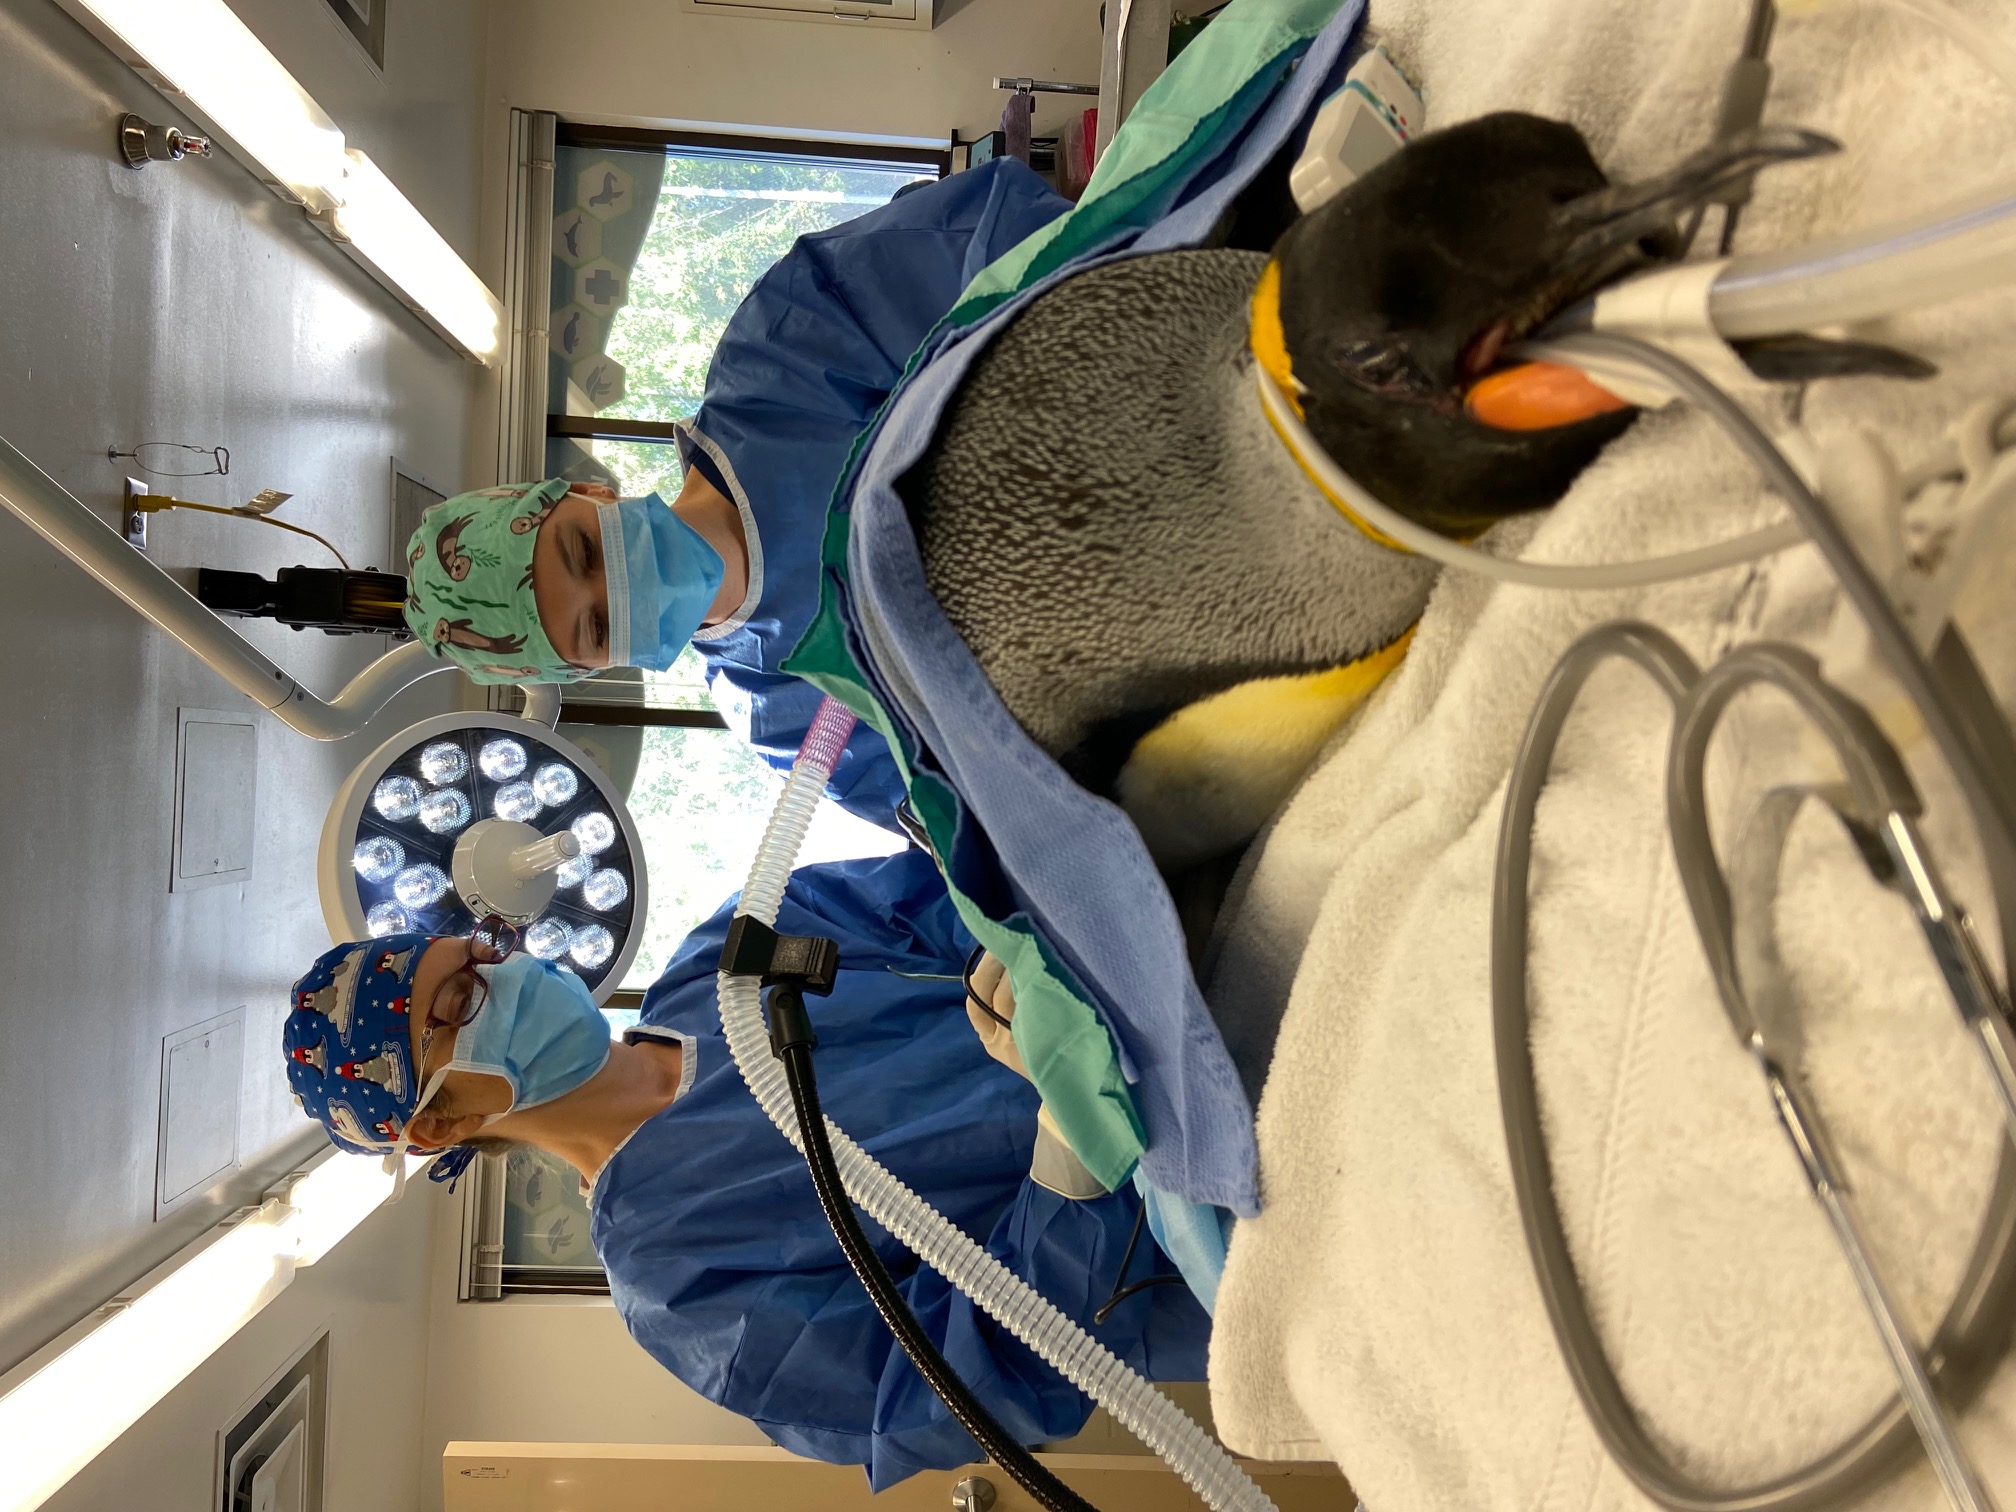 Tatiana and another vet examine a sedated penguin in a surgical setting.